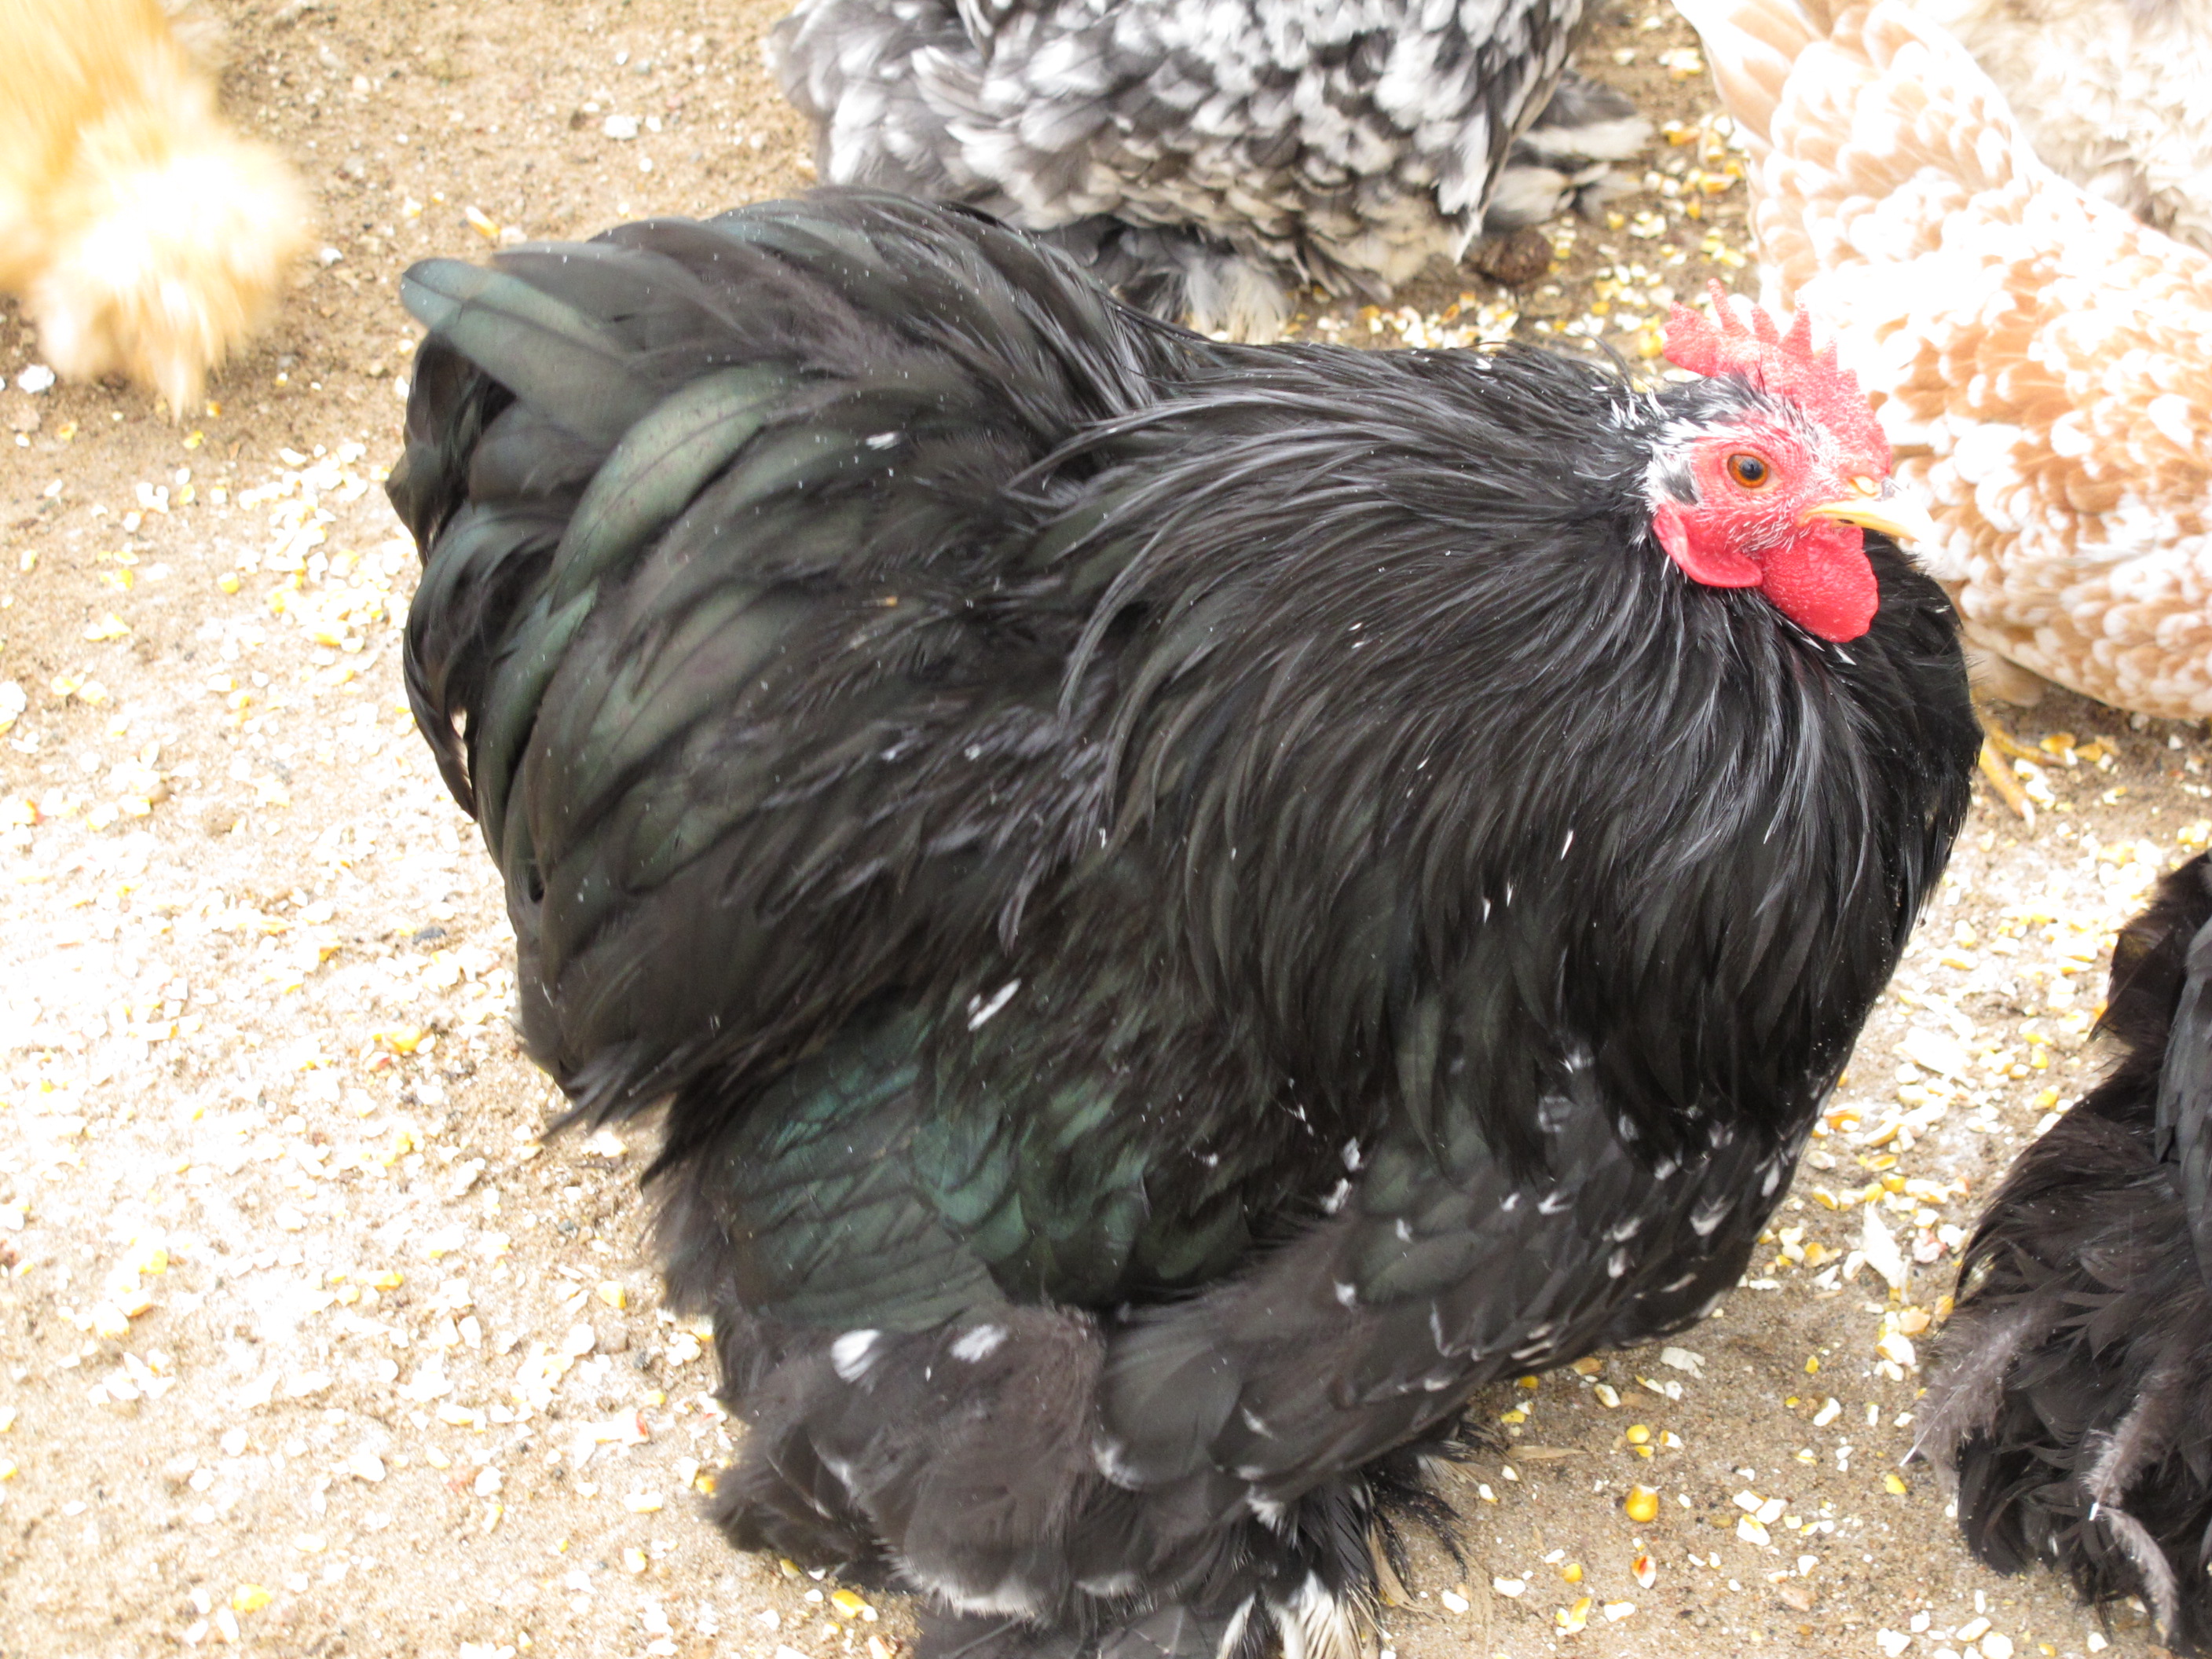 Our rooster Orion